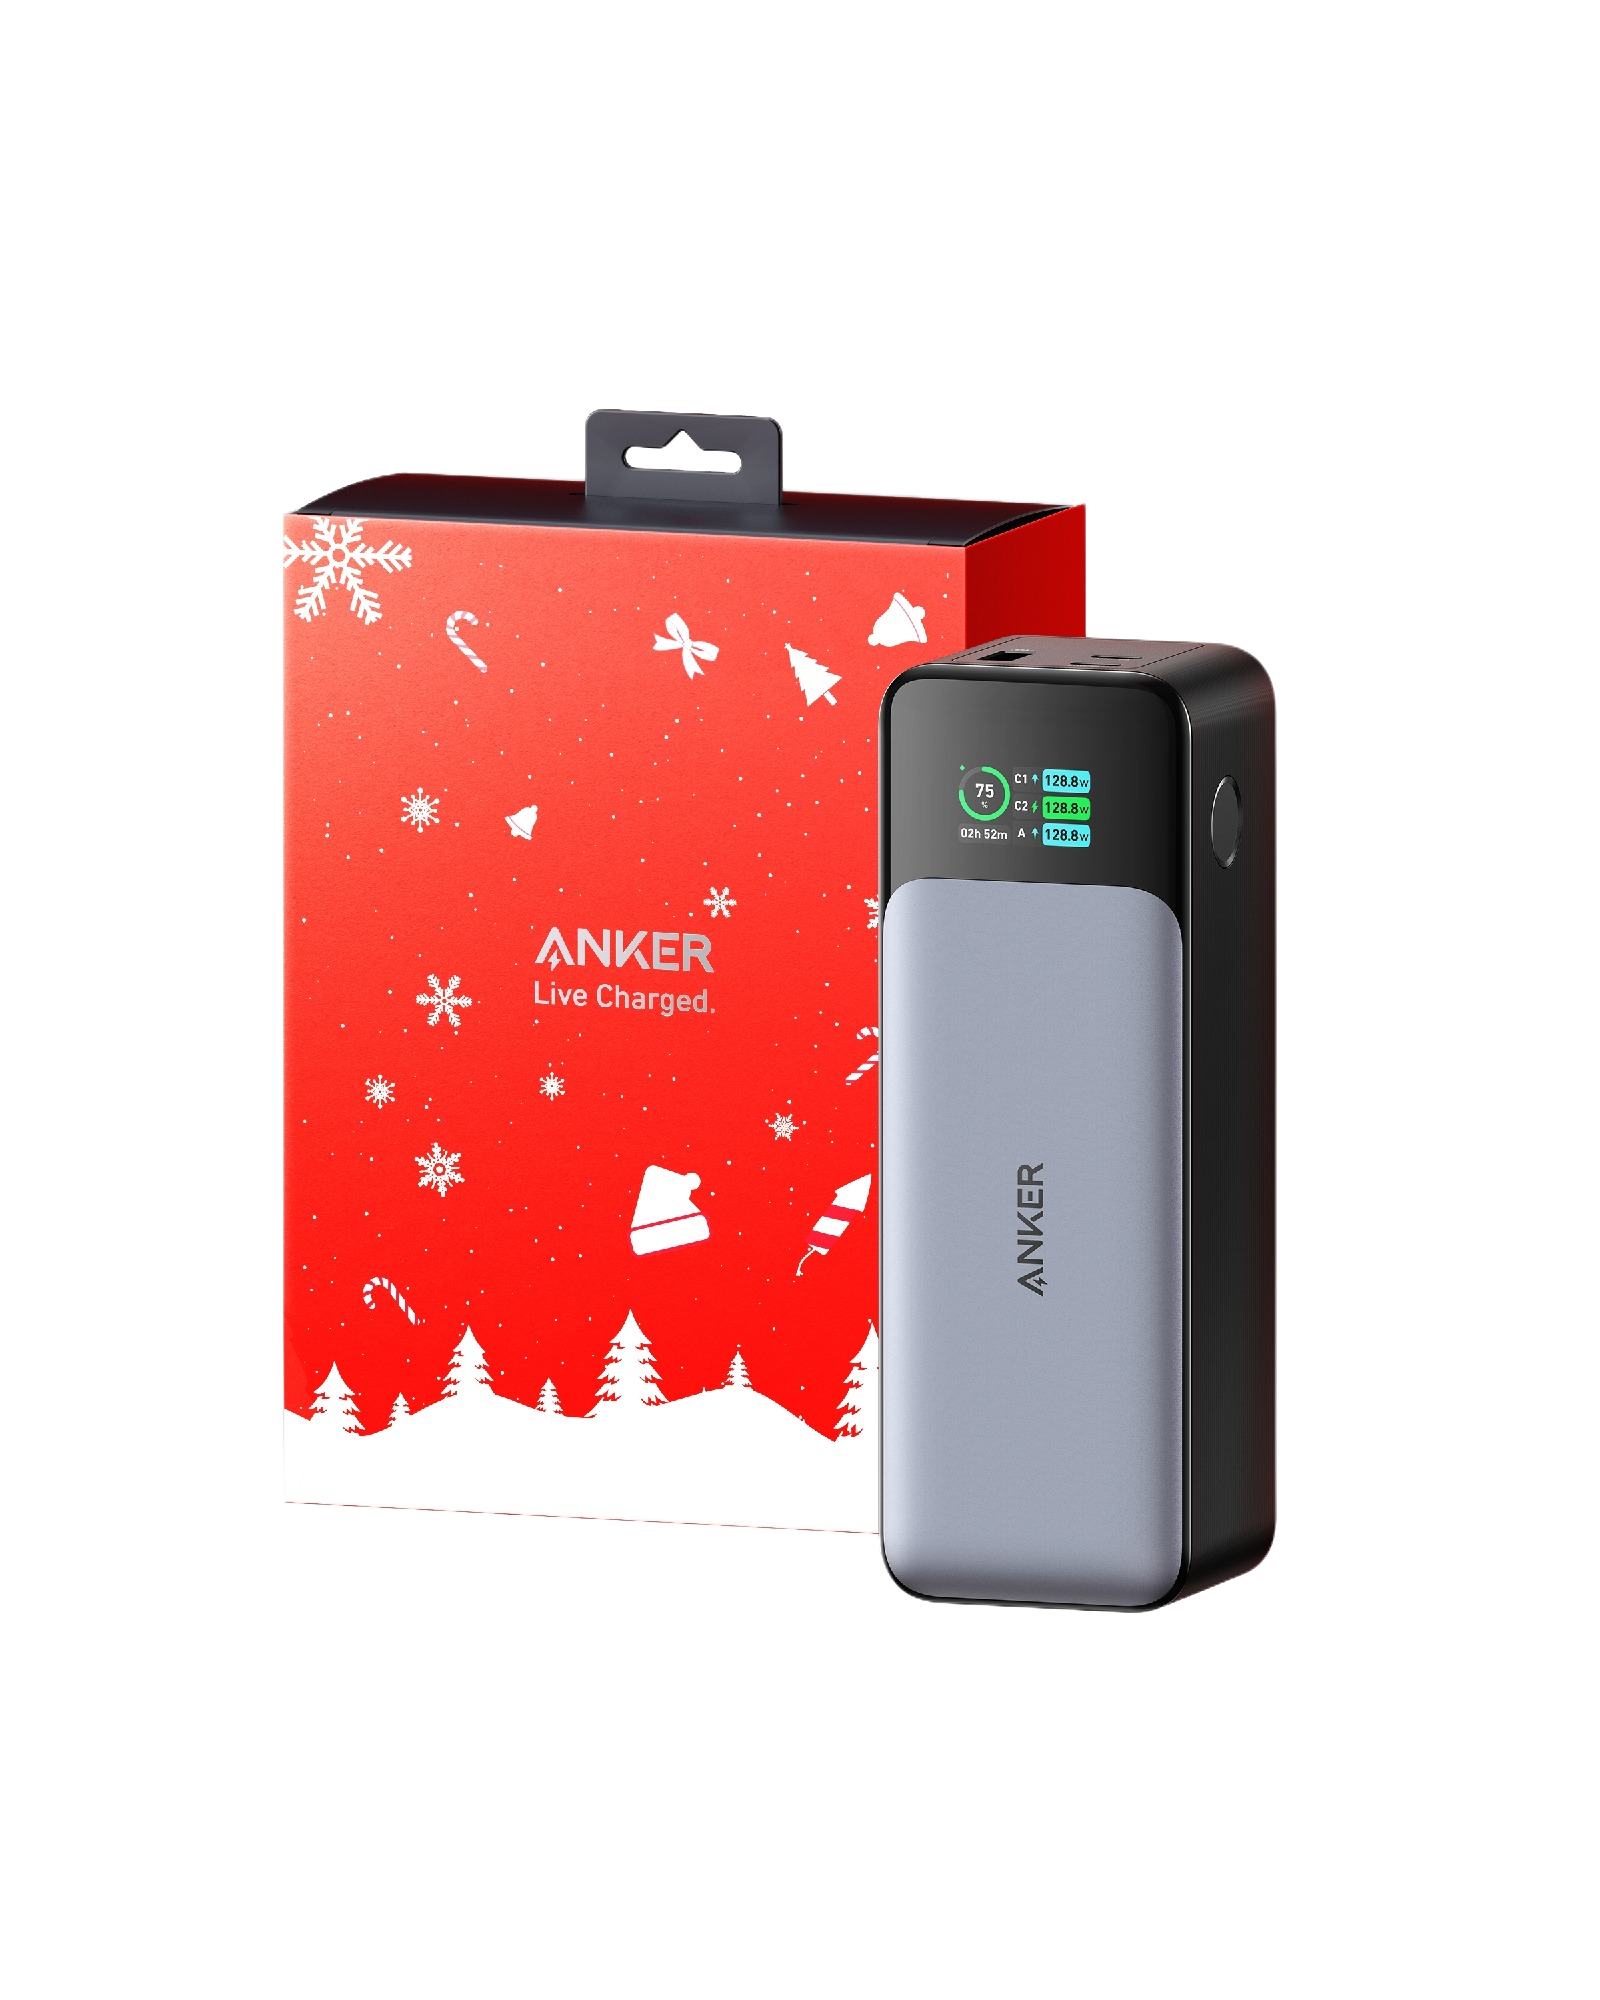 Anker 737 Power Bank (PowerCore 24K) with Festive Packaging